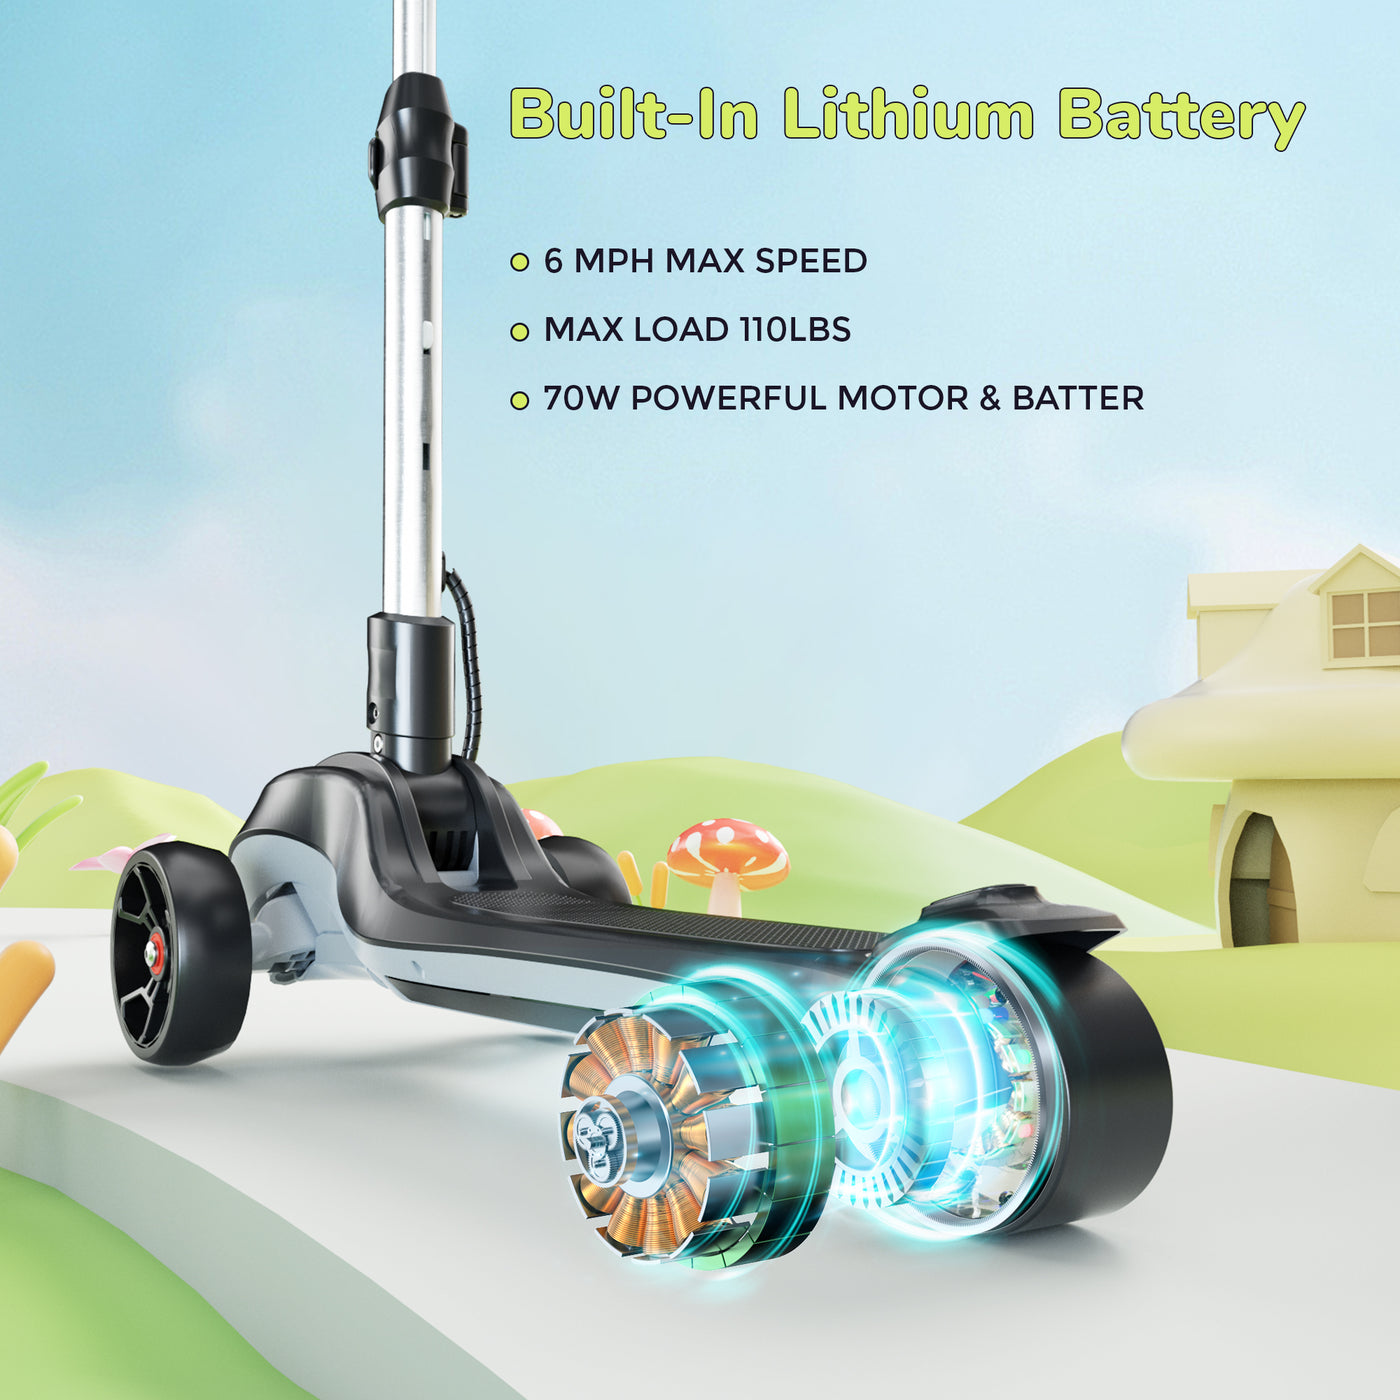 iK2 Height Adjustable Kids Electric Scooter with Flashing Wheel